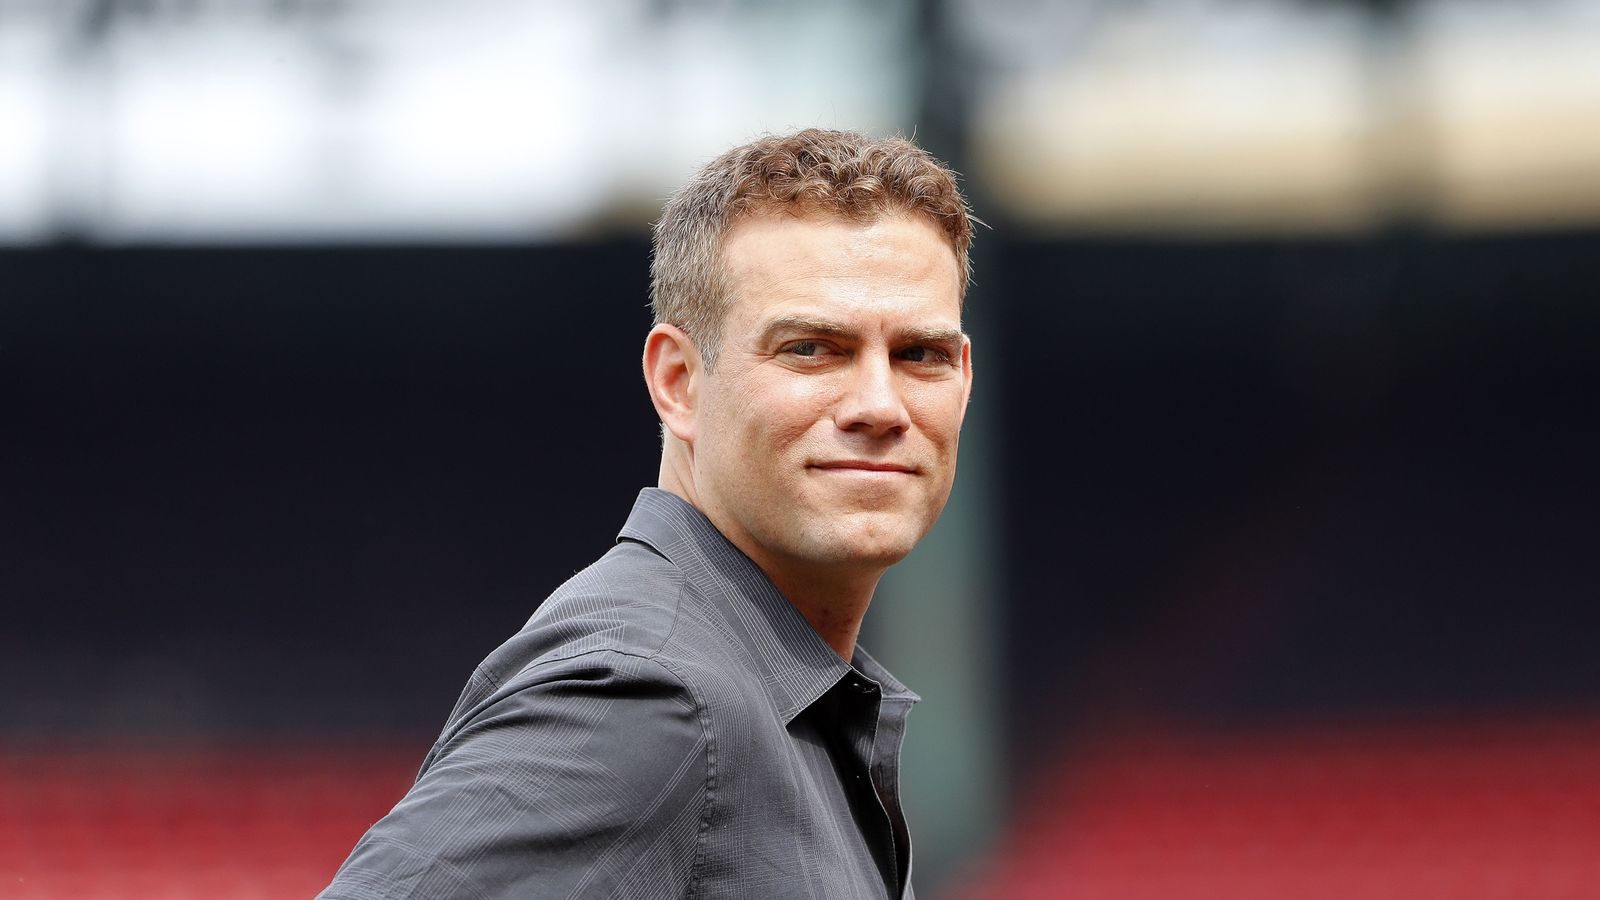 The managerial hiring trends that led to Aaron Boone are fading in